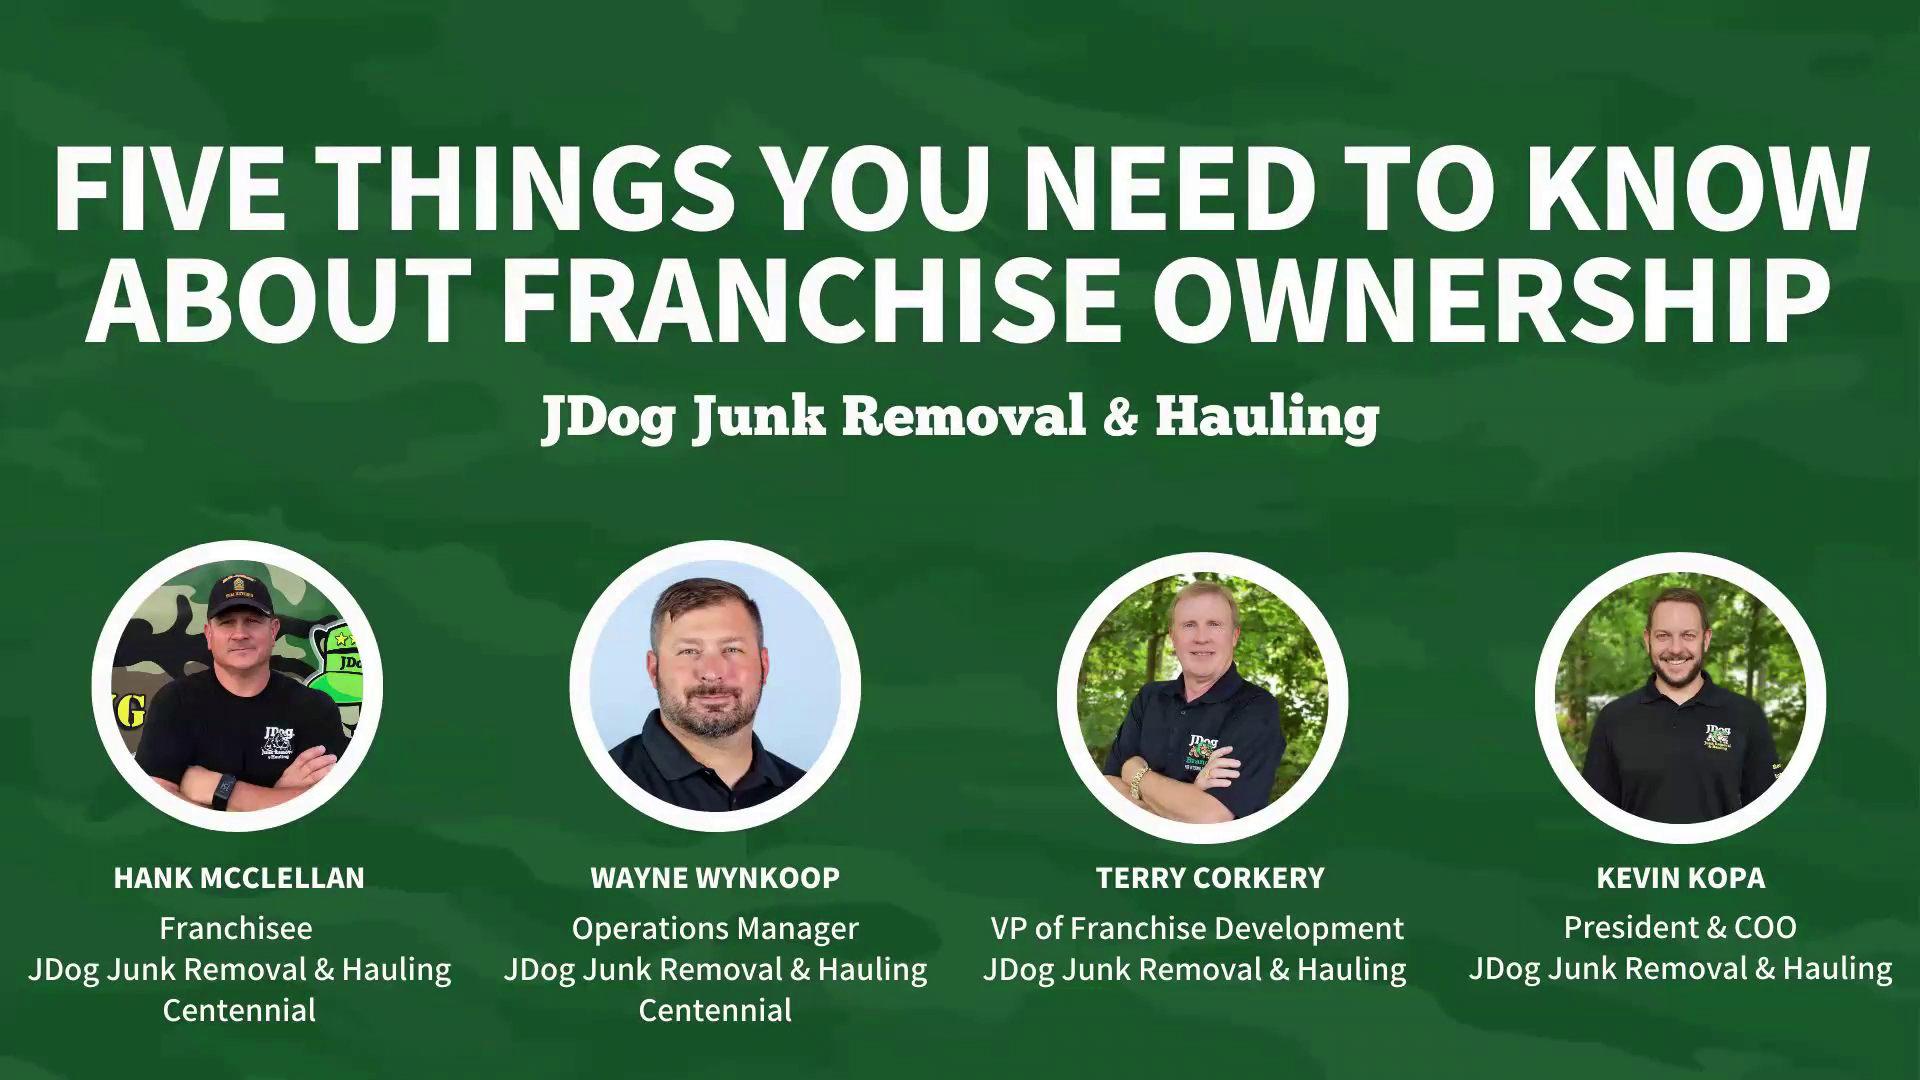 Webinar: 5 Things You Need to Know About Franchise Ownership